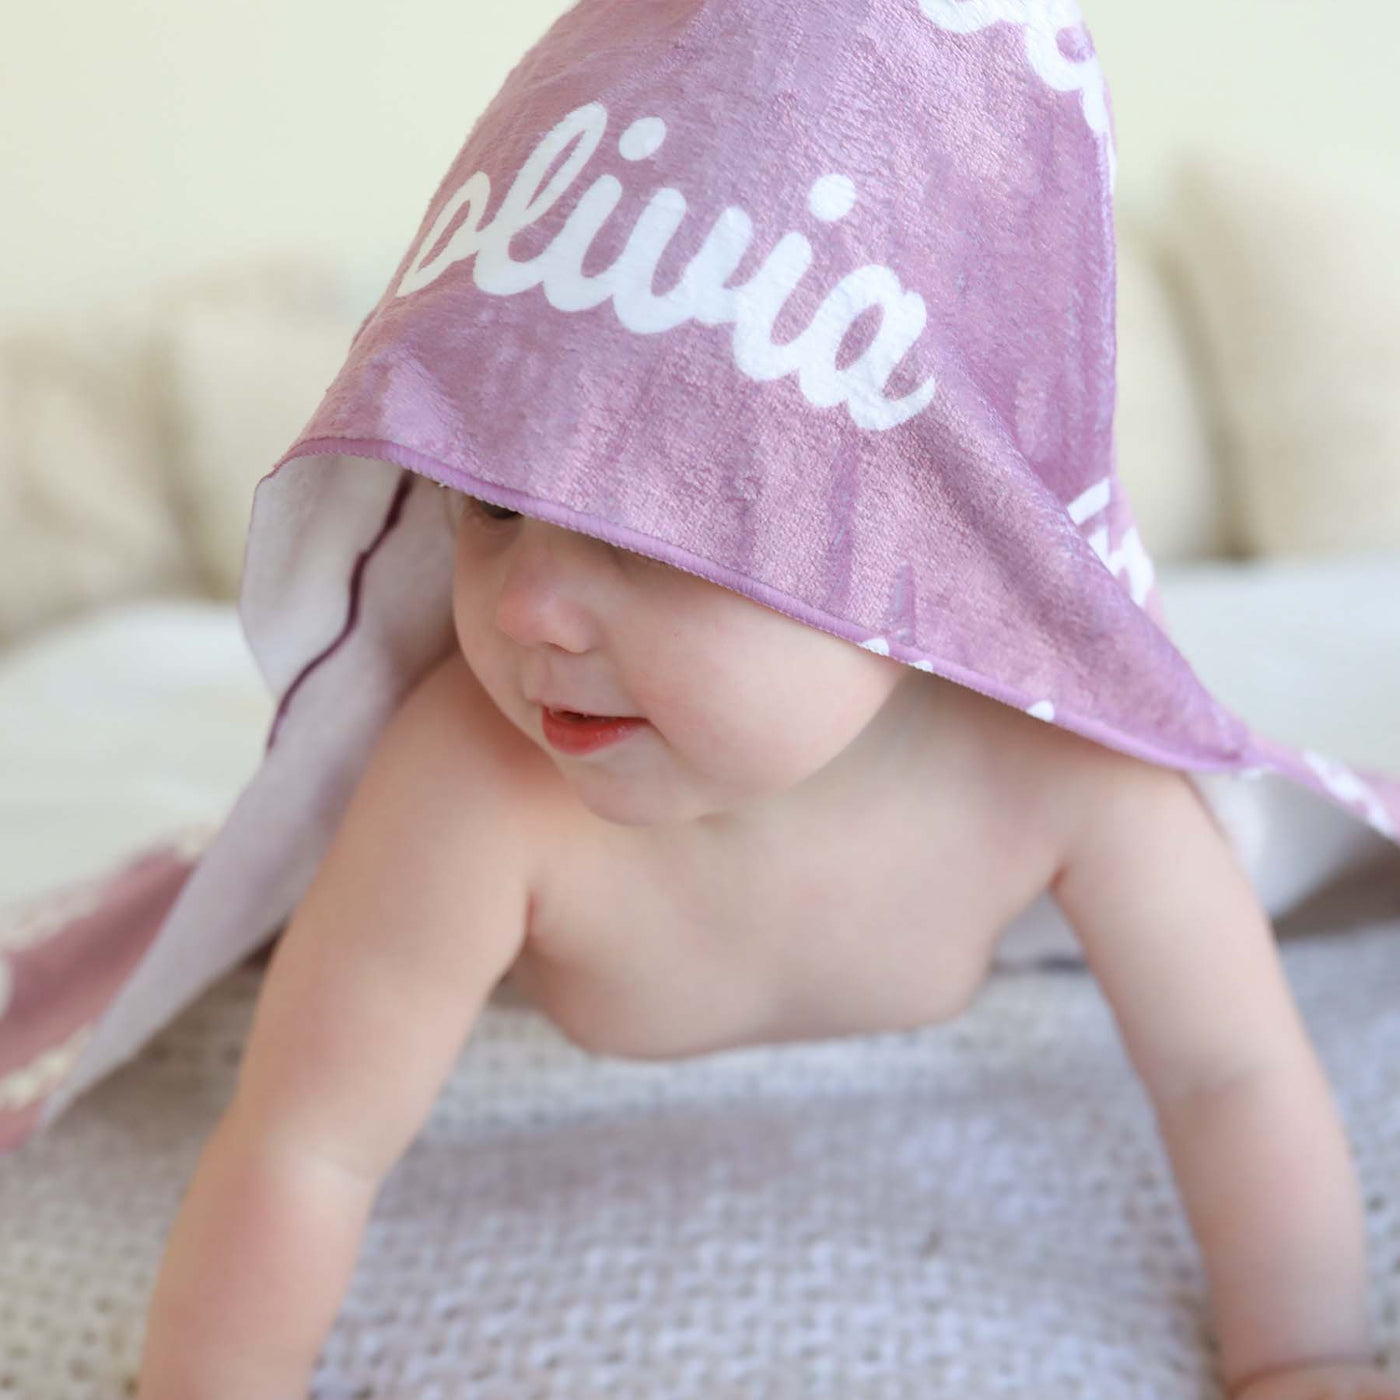 purple name personalized baby name towel with hood